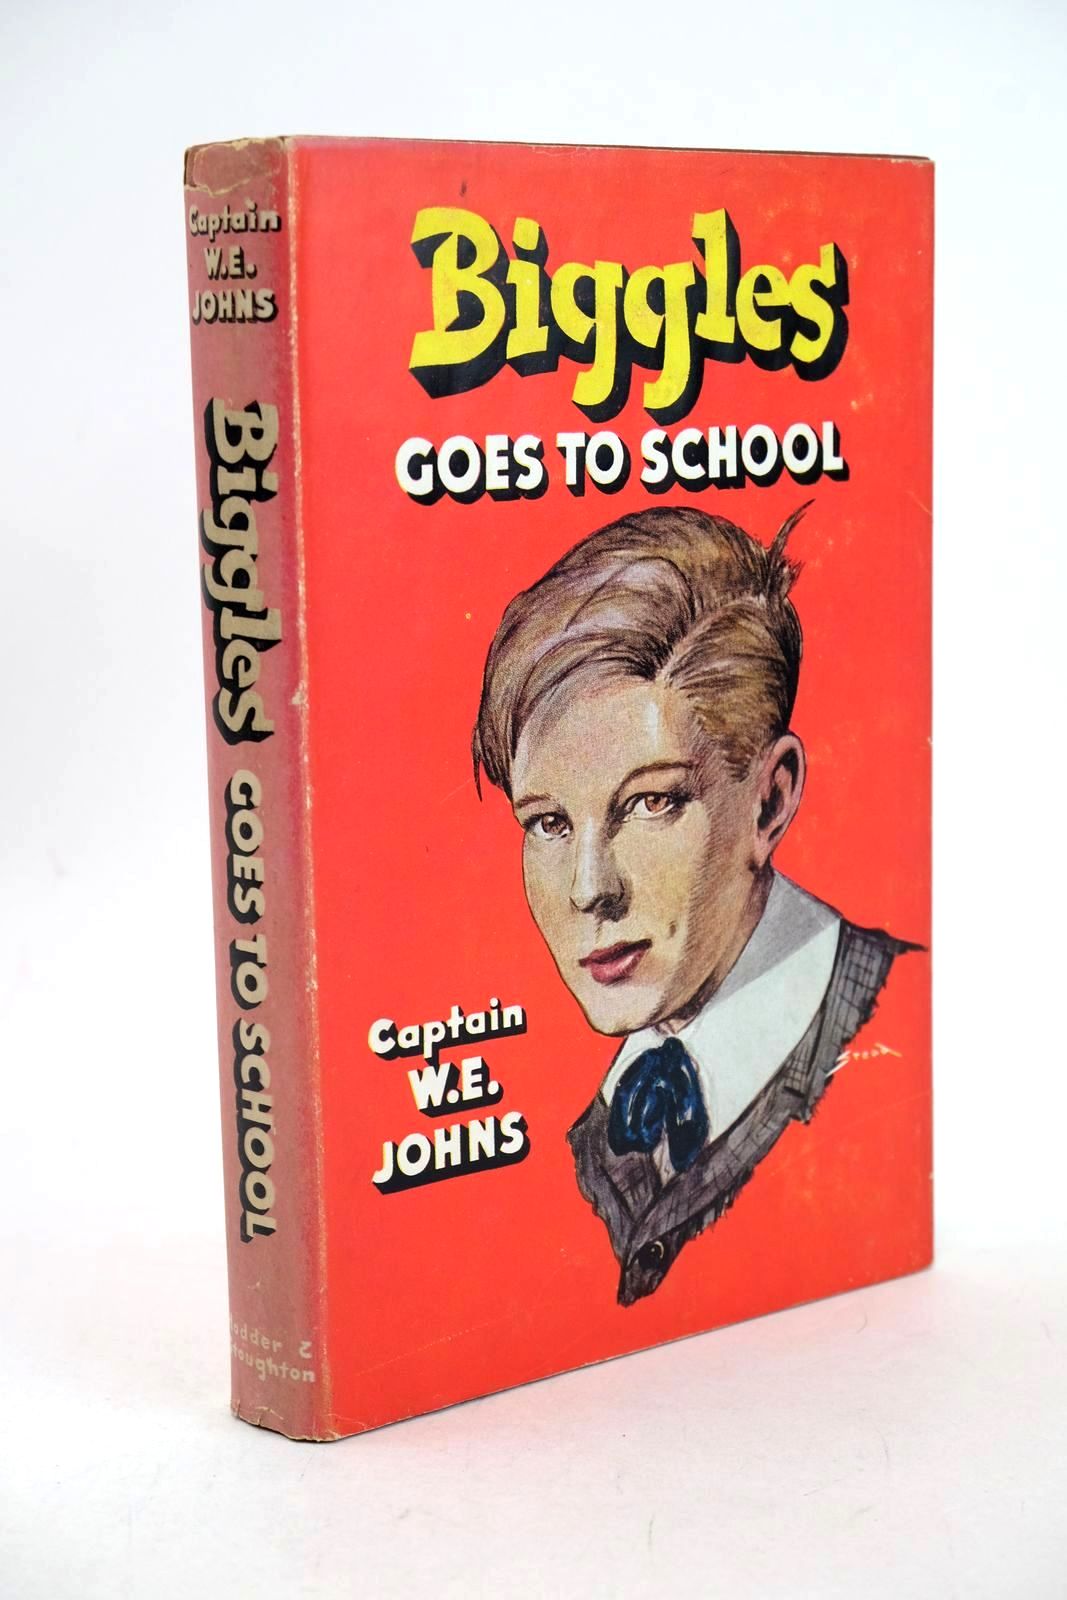 Photo of BIGGLES GOES TO SCHOOL written by Johns, W.E. illustrated by Stead,  published by Hodder &amp; Stoughton (STOCK CODE: 1326685)  for sale by Stella & Rose's Books